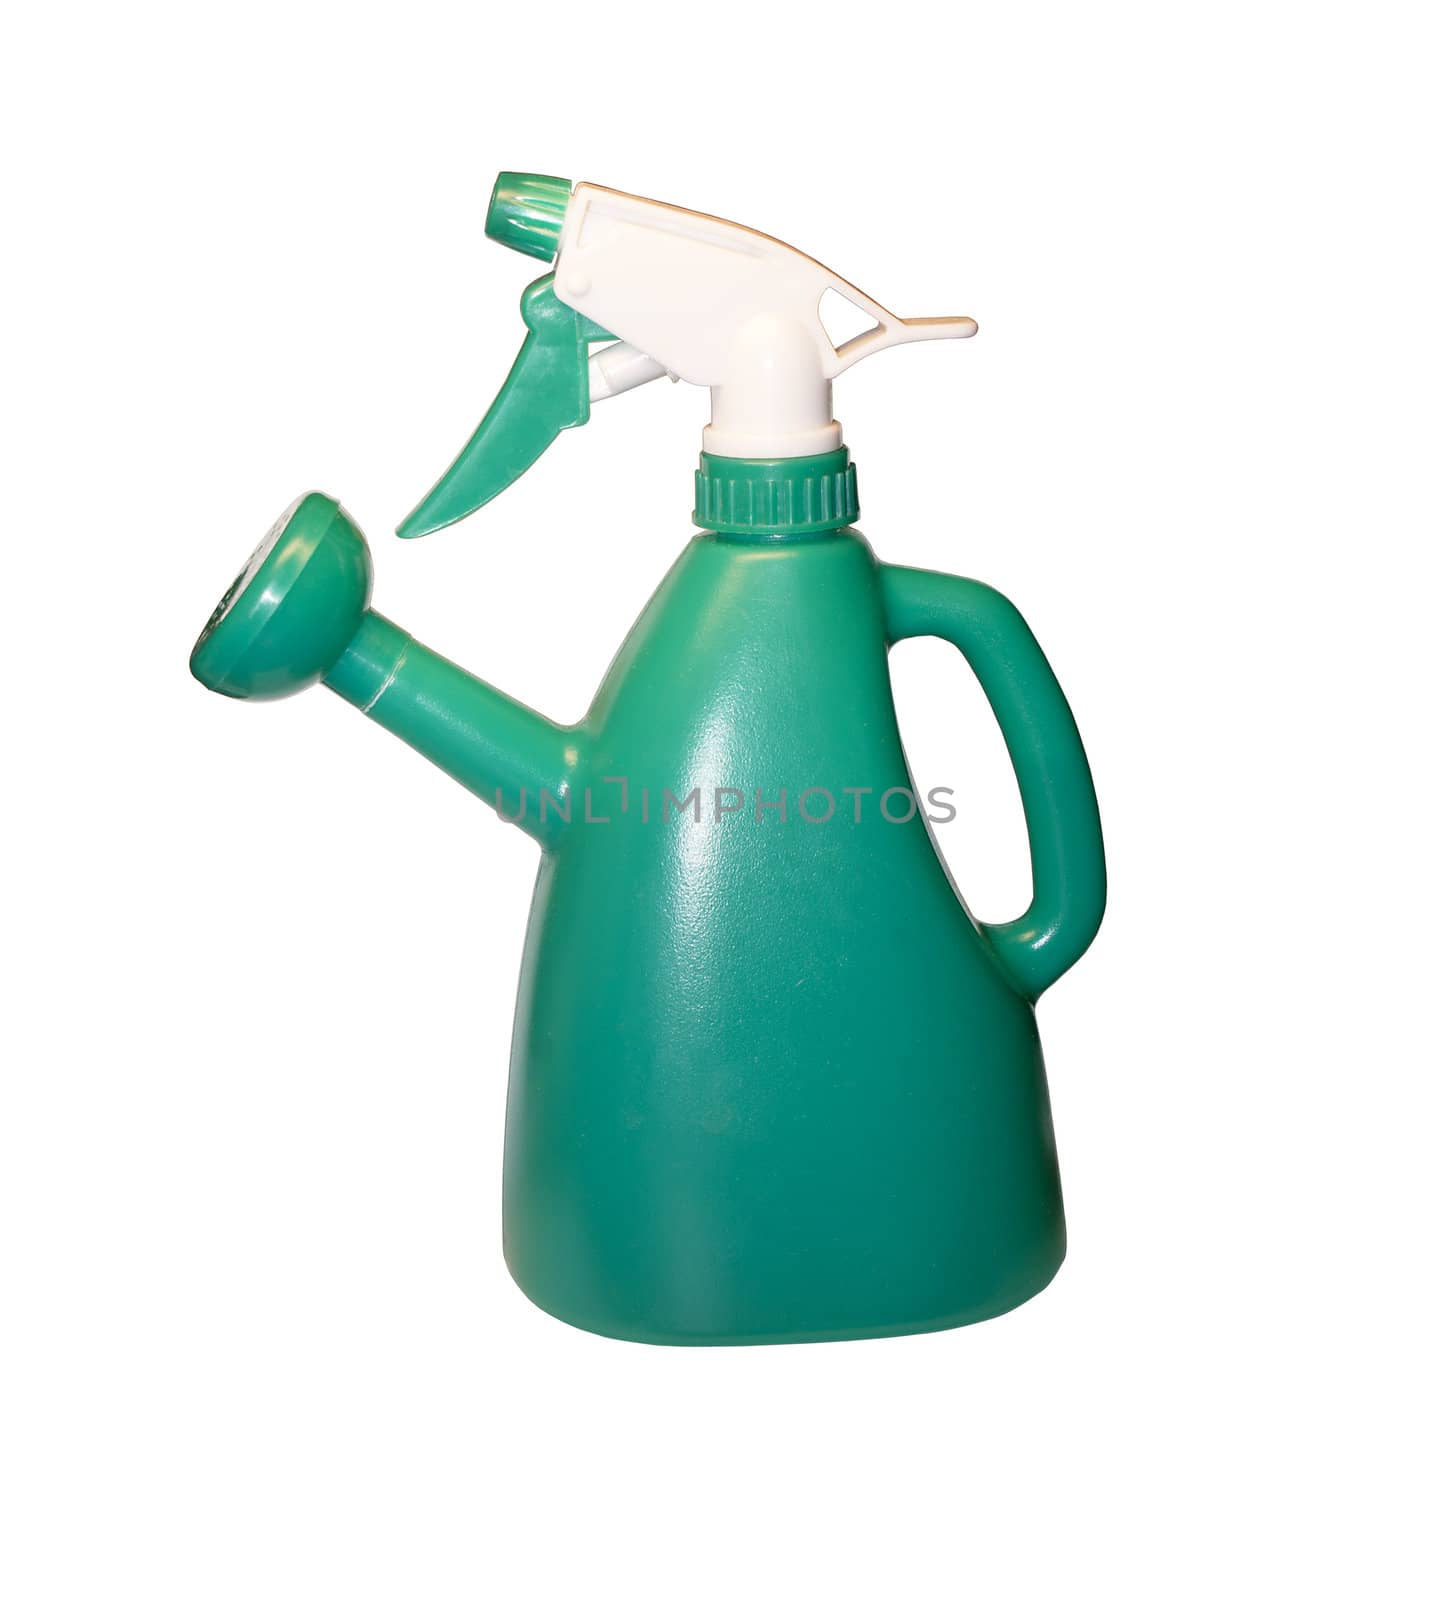 Watering can-sprayer for house plants over white background